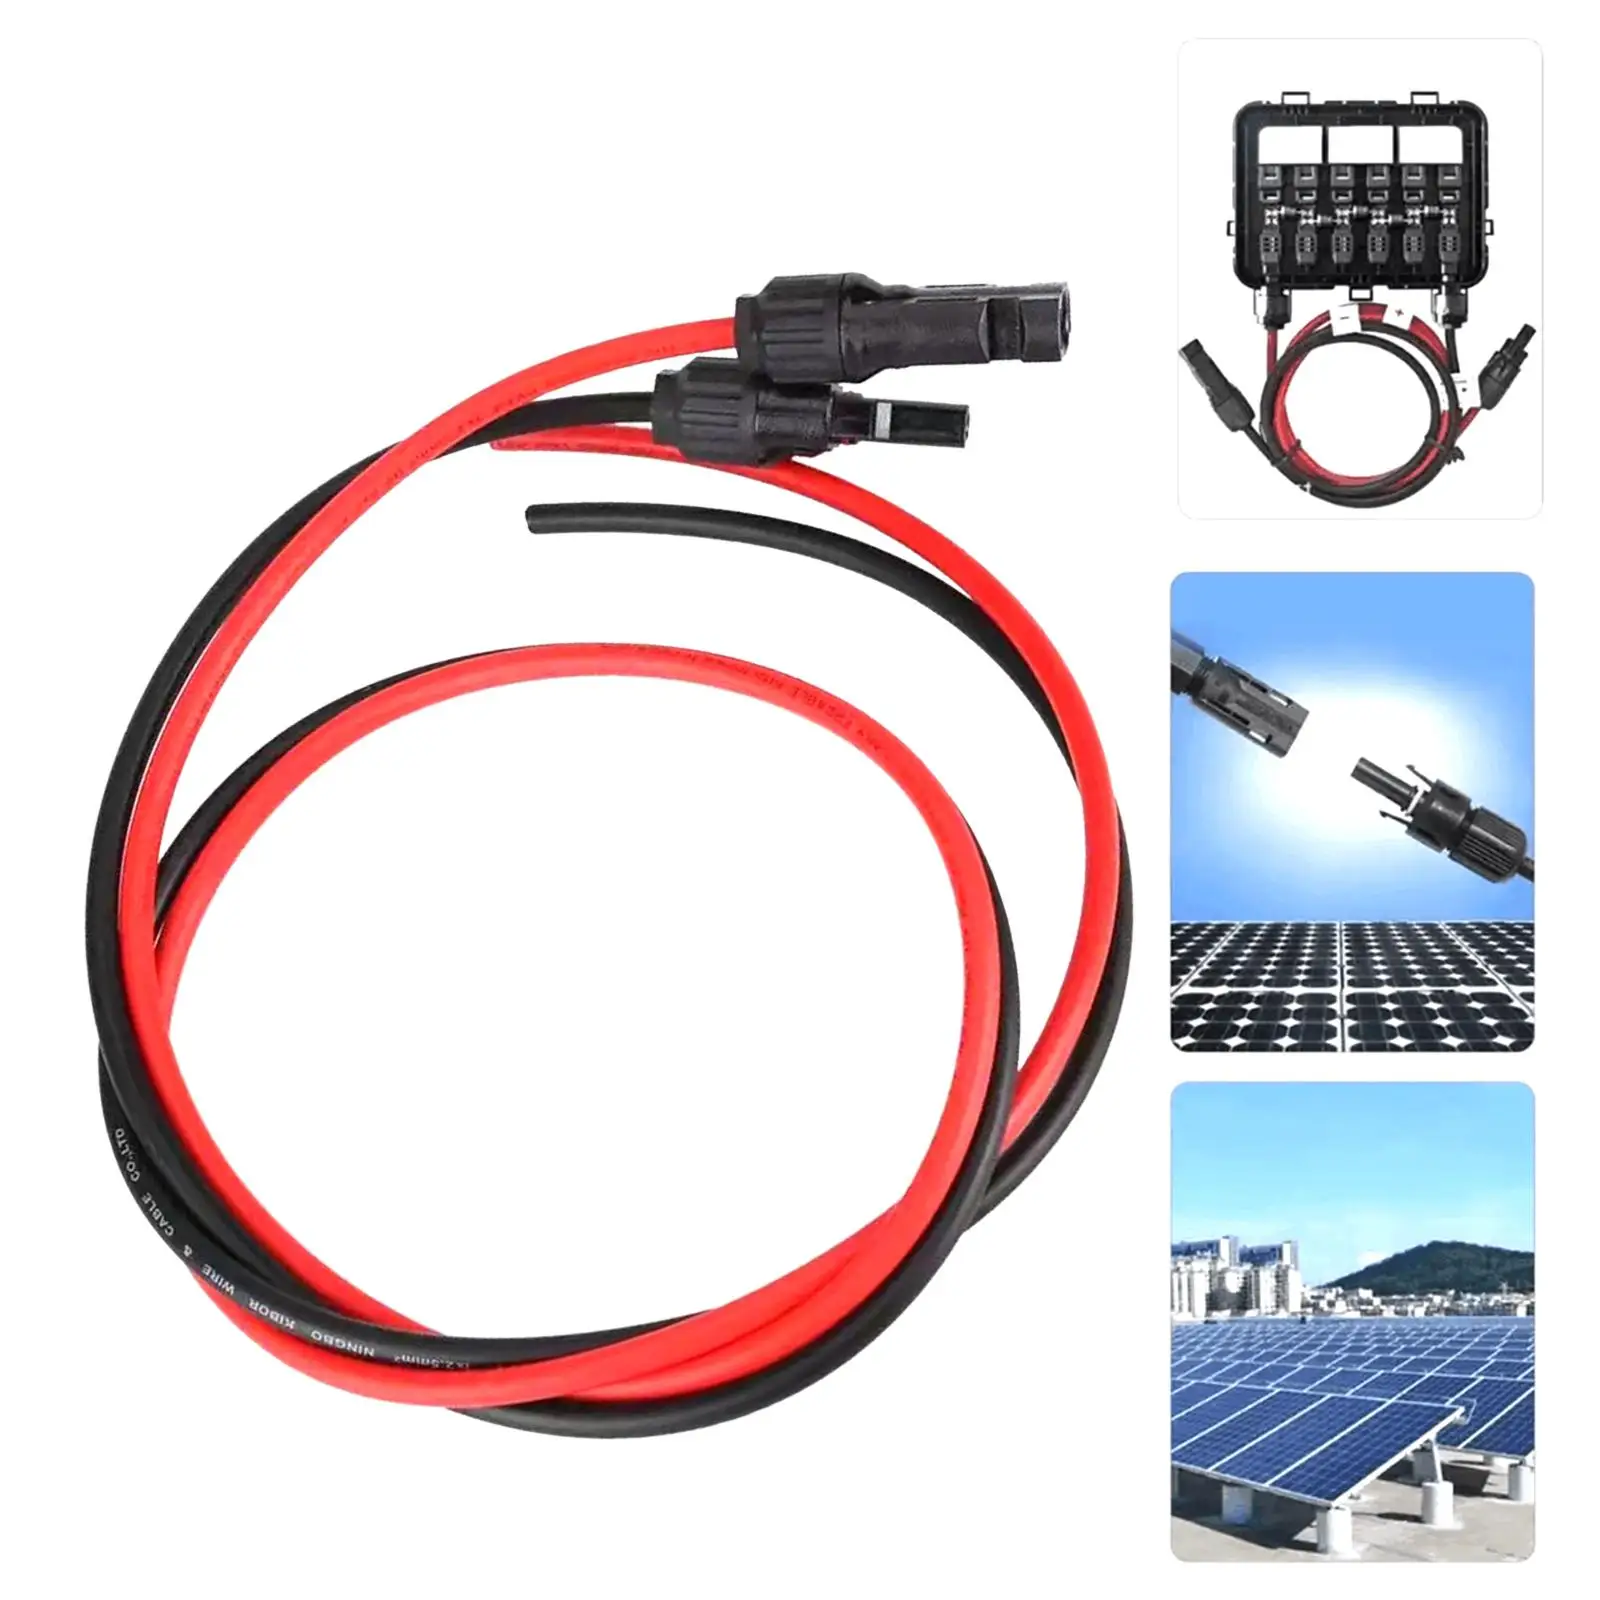 Connector Cable Solar Wire Extension for Photovoltaic Systems Traveling Yard